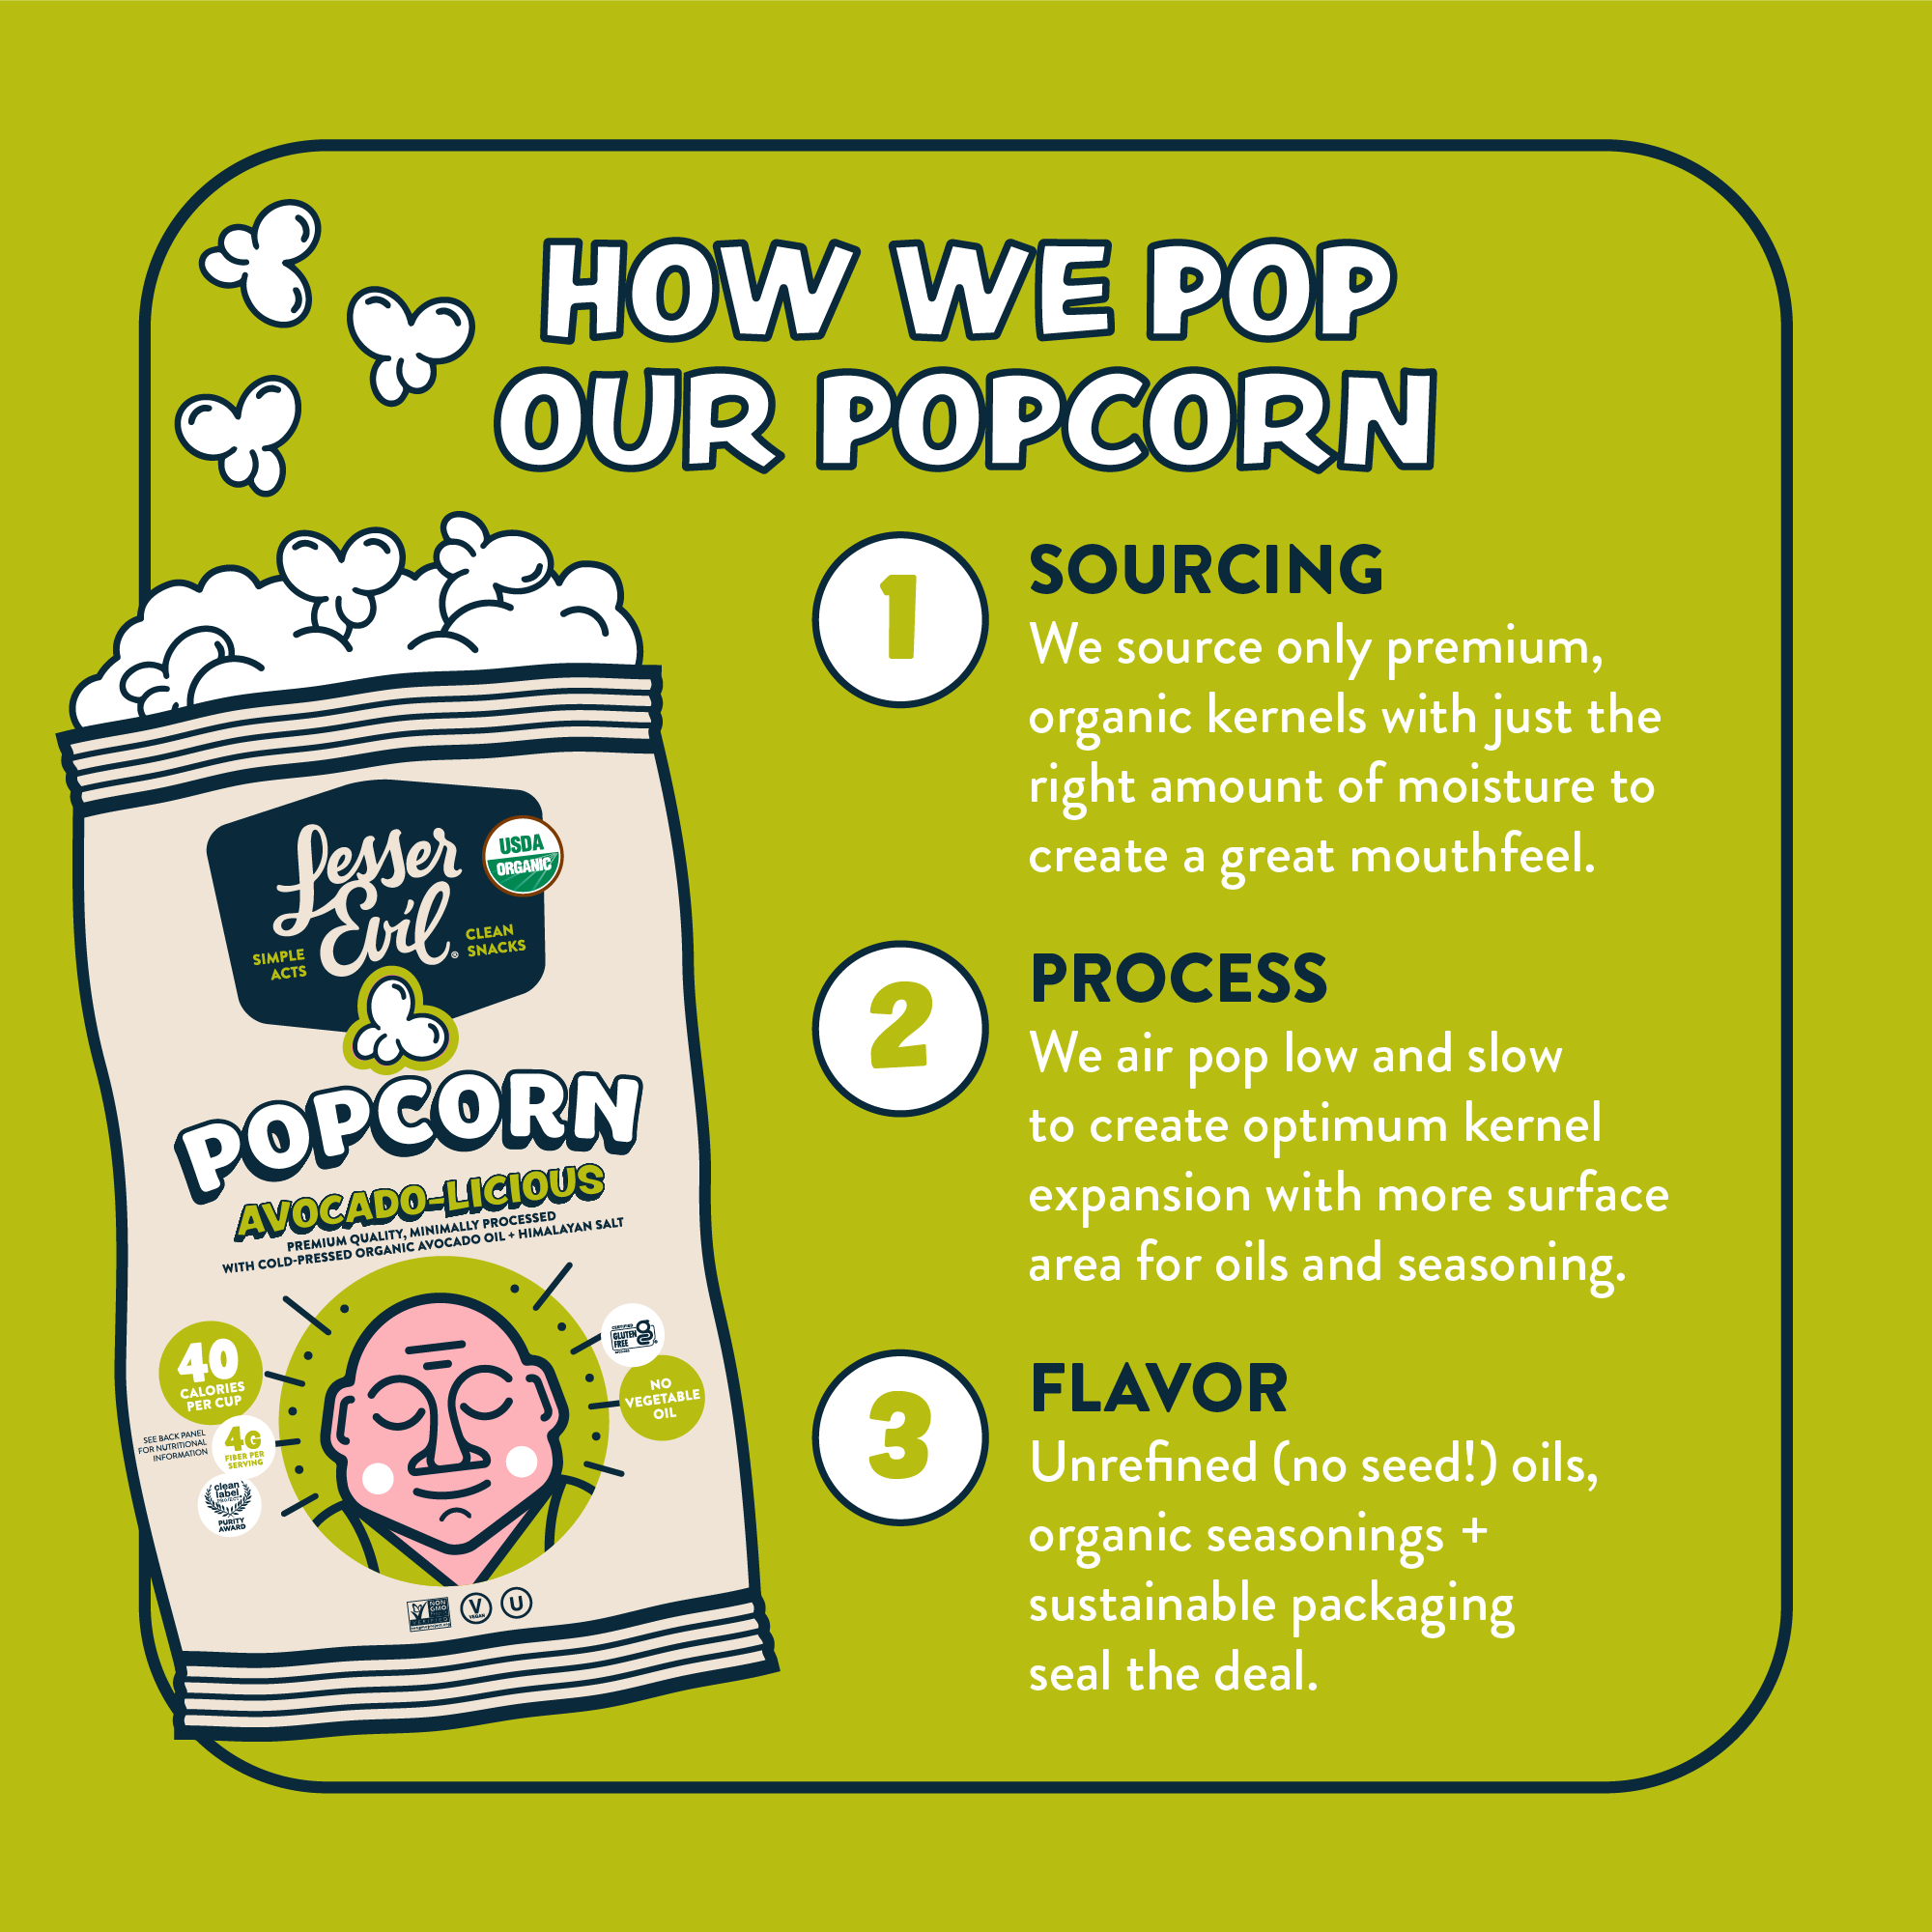 information about how we pop our avocado-licious organic popcorn